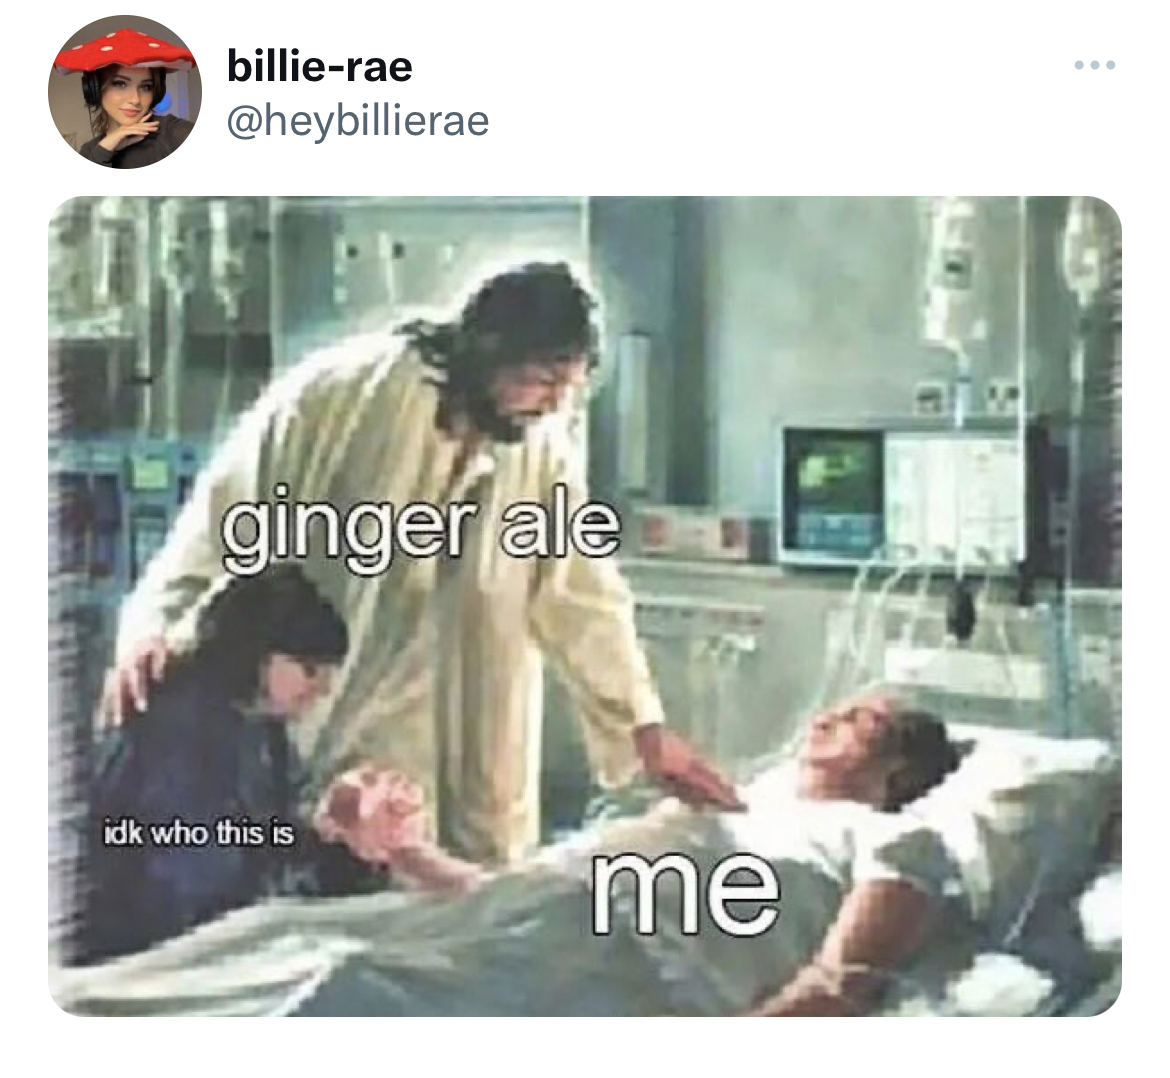 savage tweets to start the week - jesus pray for the sick - billierae ginger ale idk who this is me B